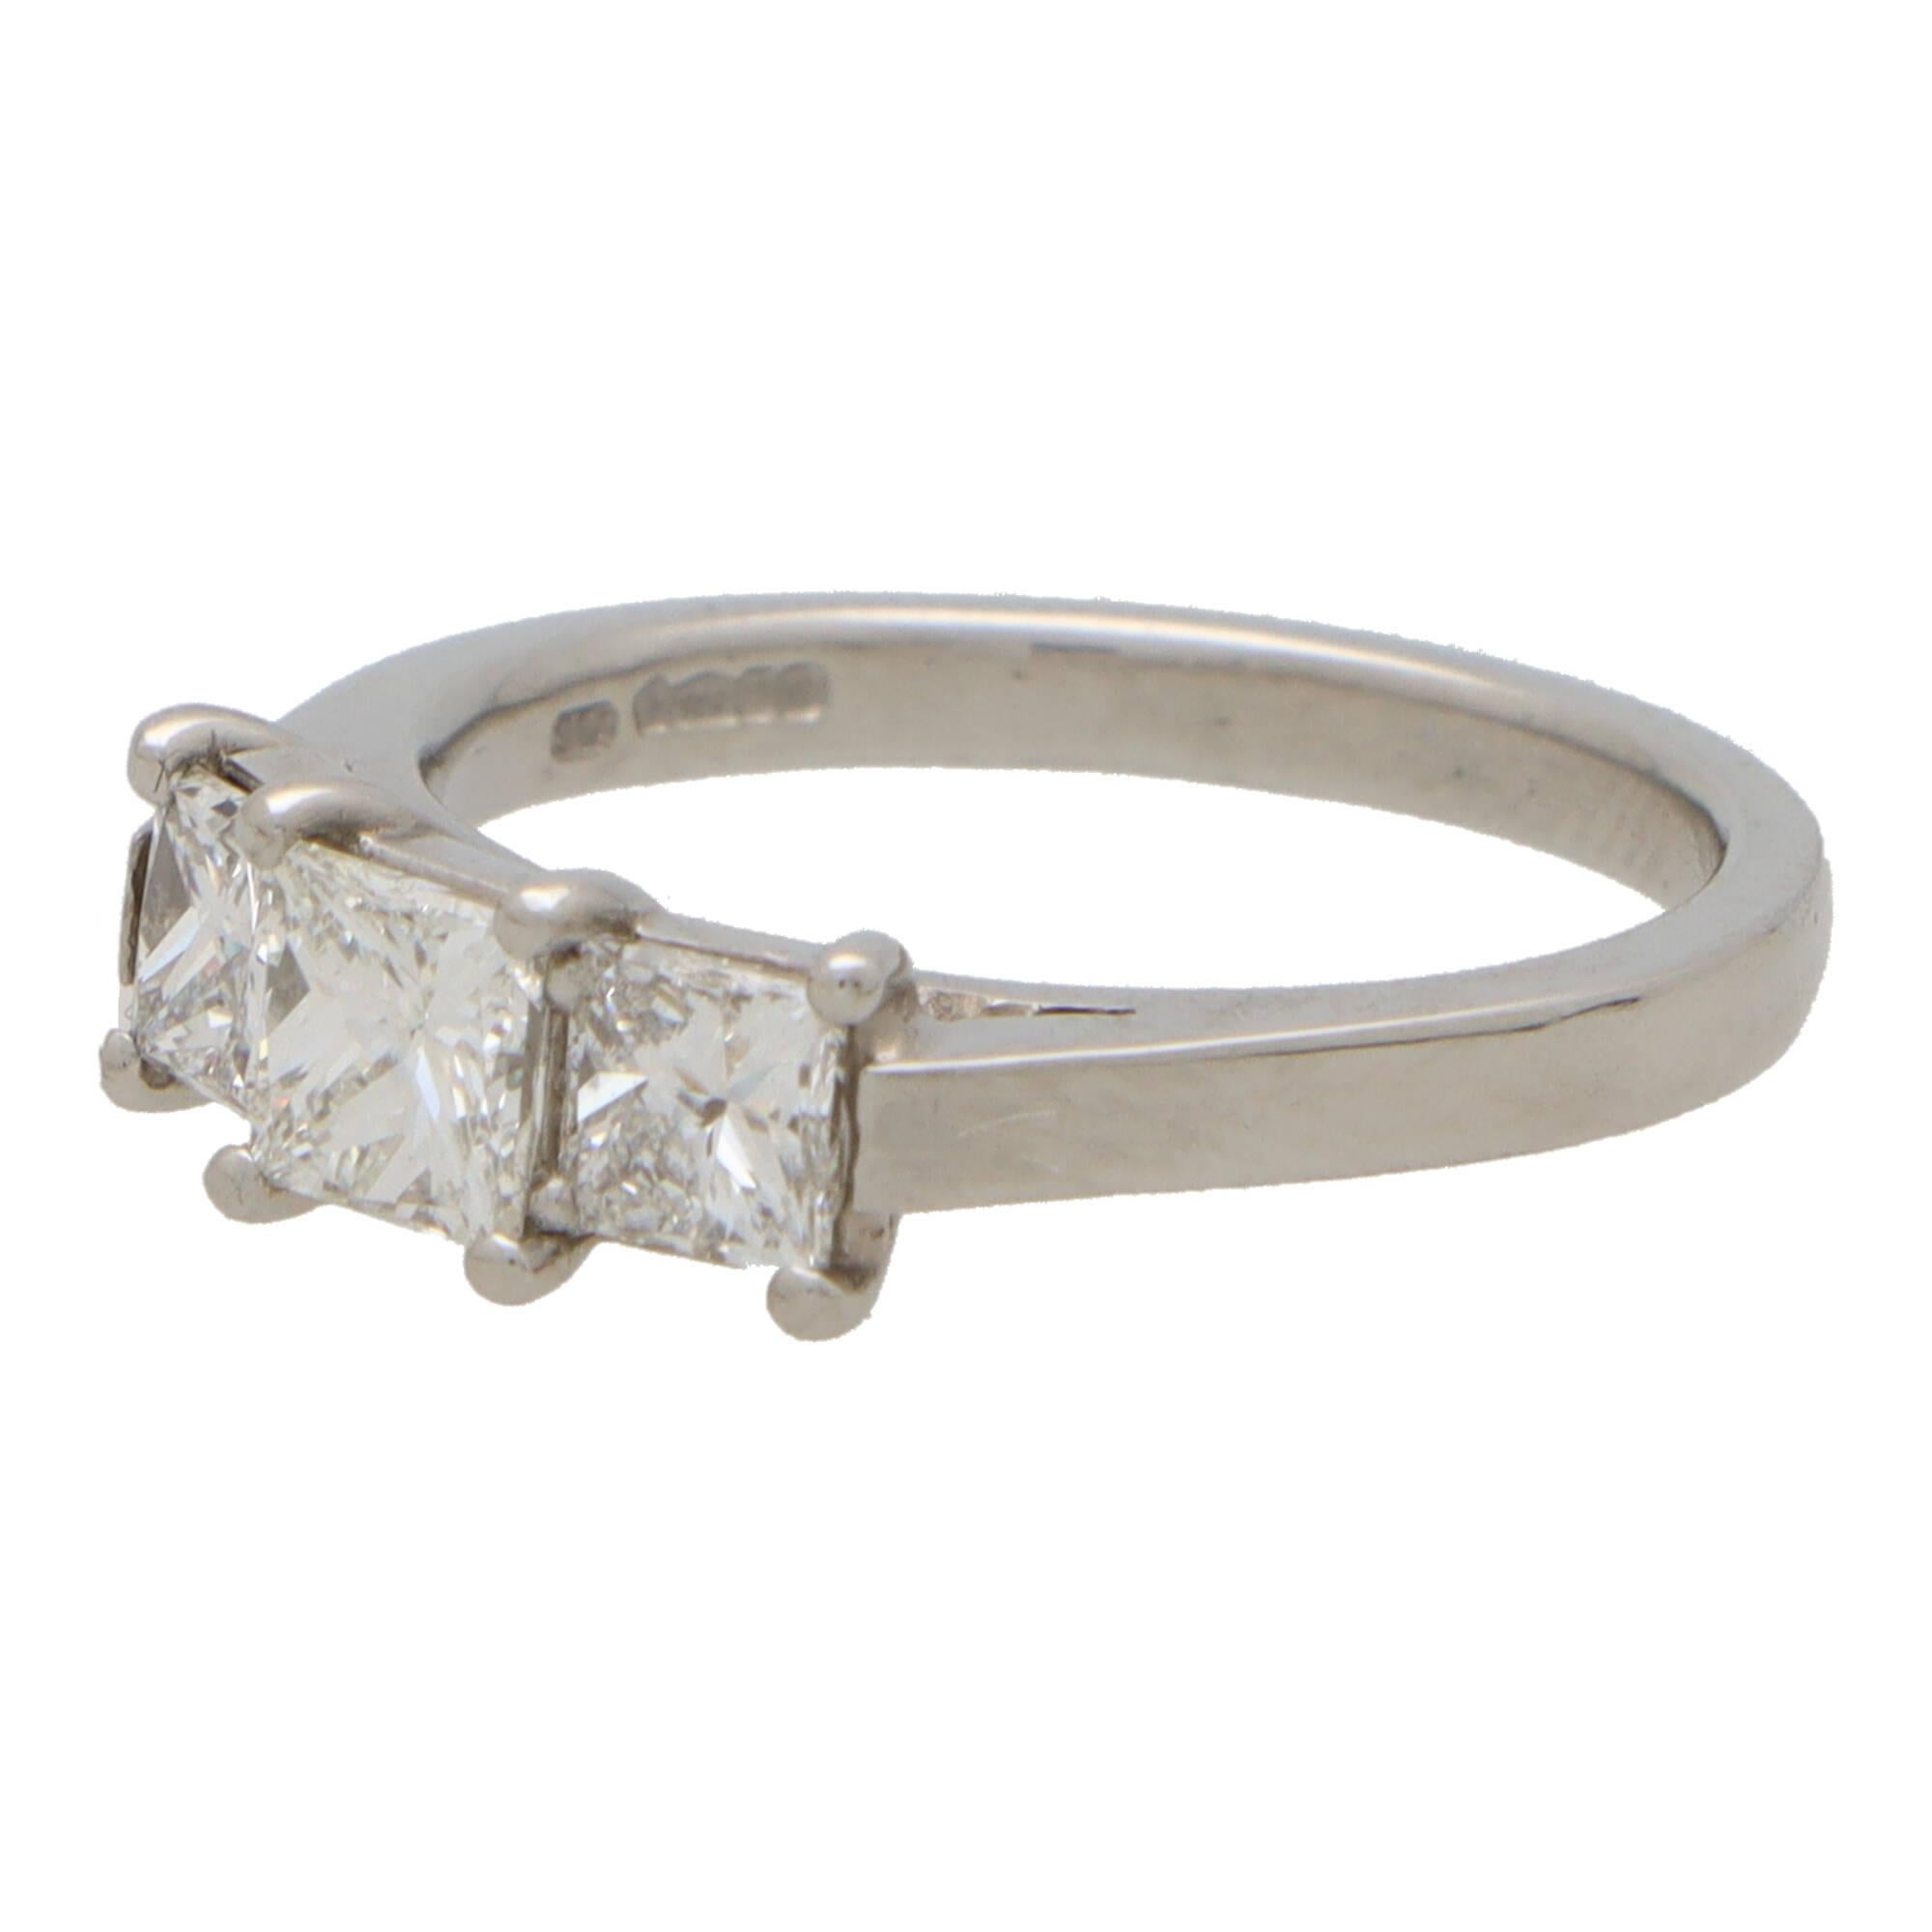 A beautifully crafted princess cut diamond three stone ring set in 18k white gold.

The ring is centrally set with a sparkly 0.41 carat princess cut diamond. This is then sided by two perfectly matched 0.27 carat princess cut diamonds. All the